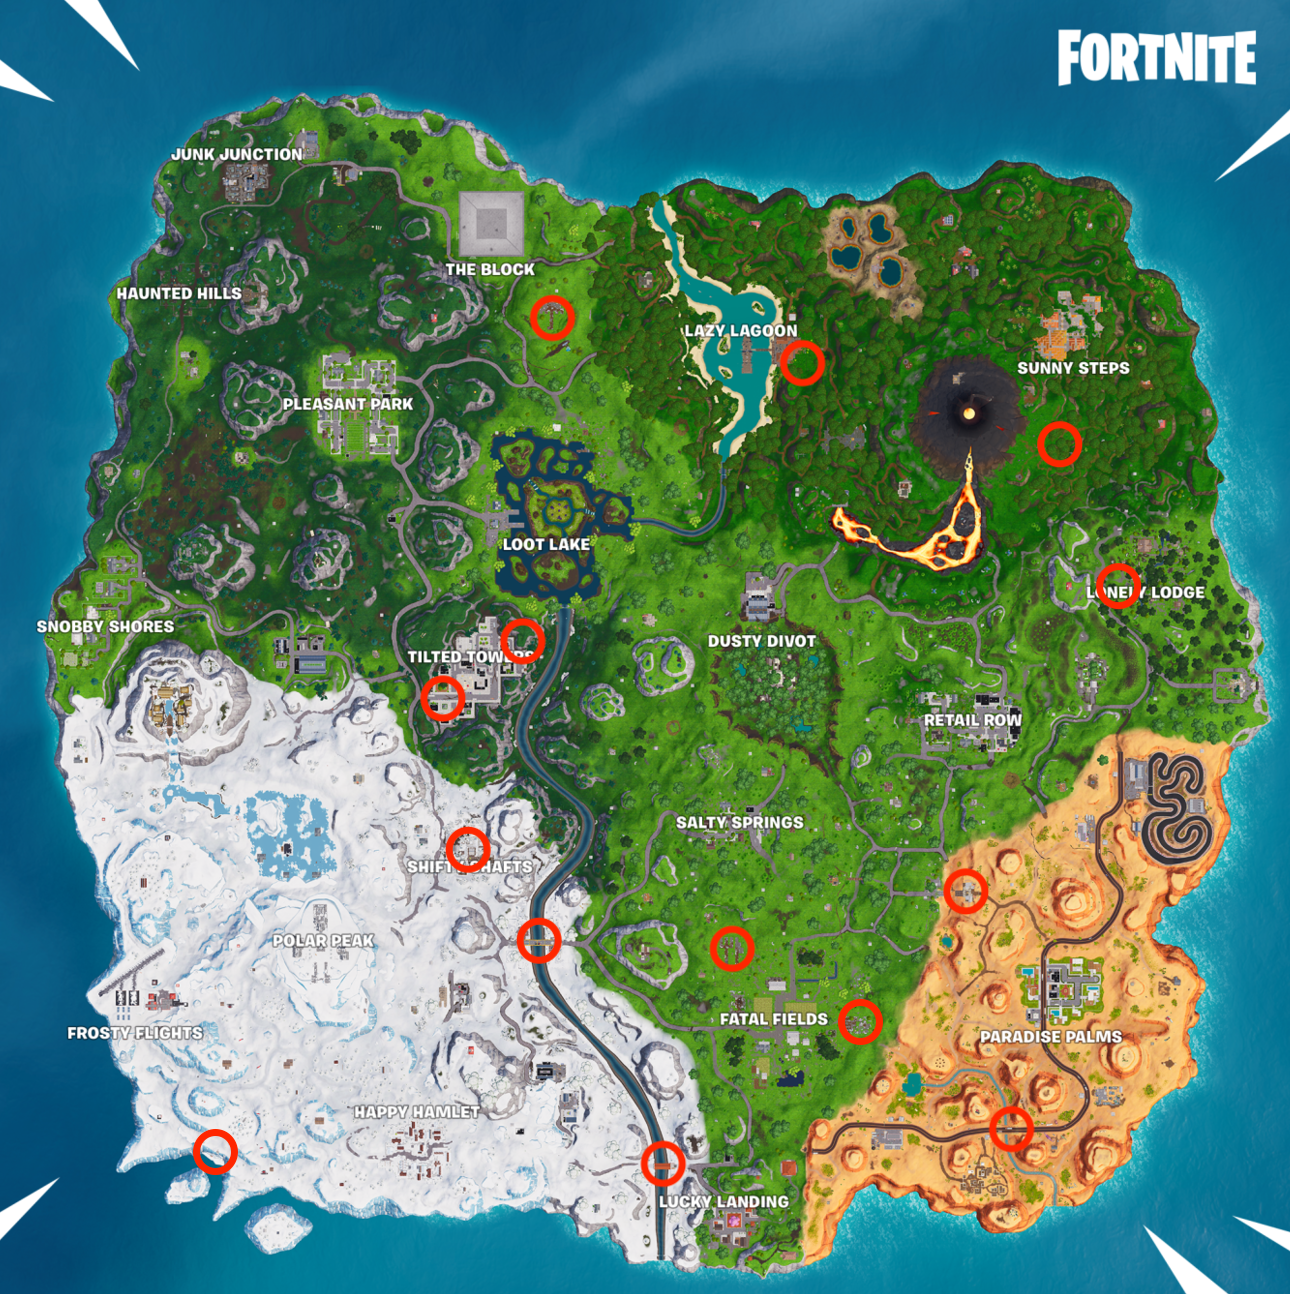 fortnite puzzle pieces season 8 locations map and video guide inverse - alle puzzleteile fortnite season 8